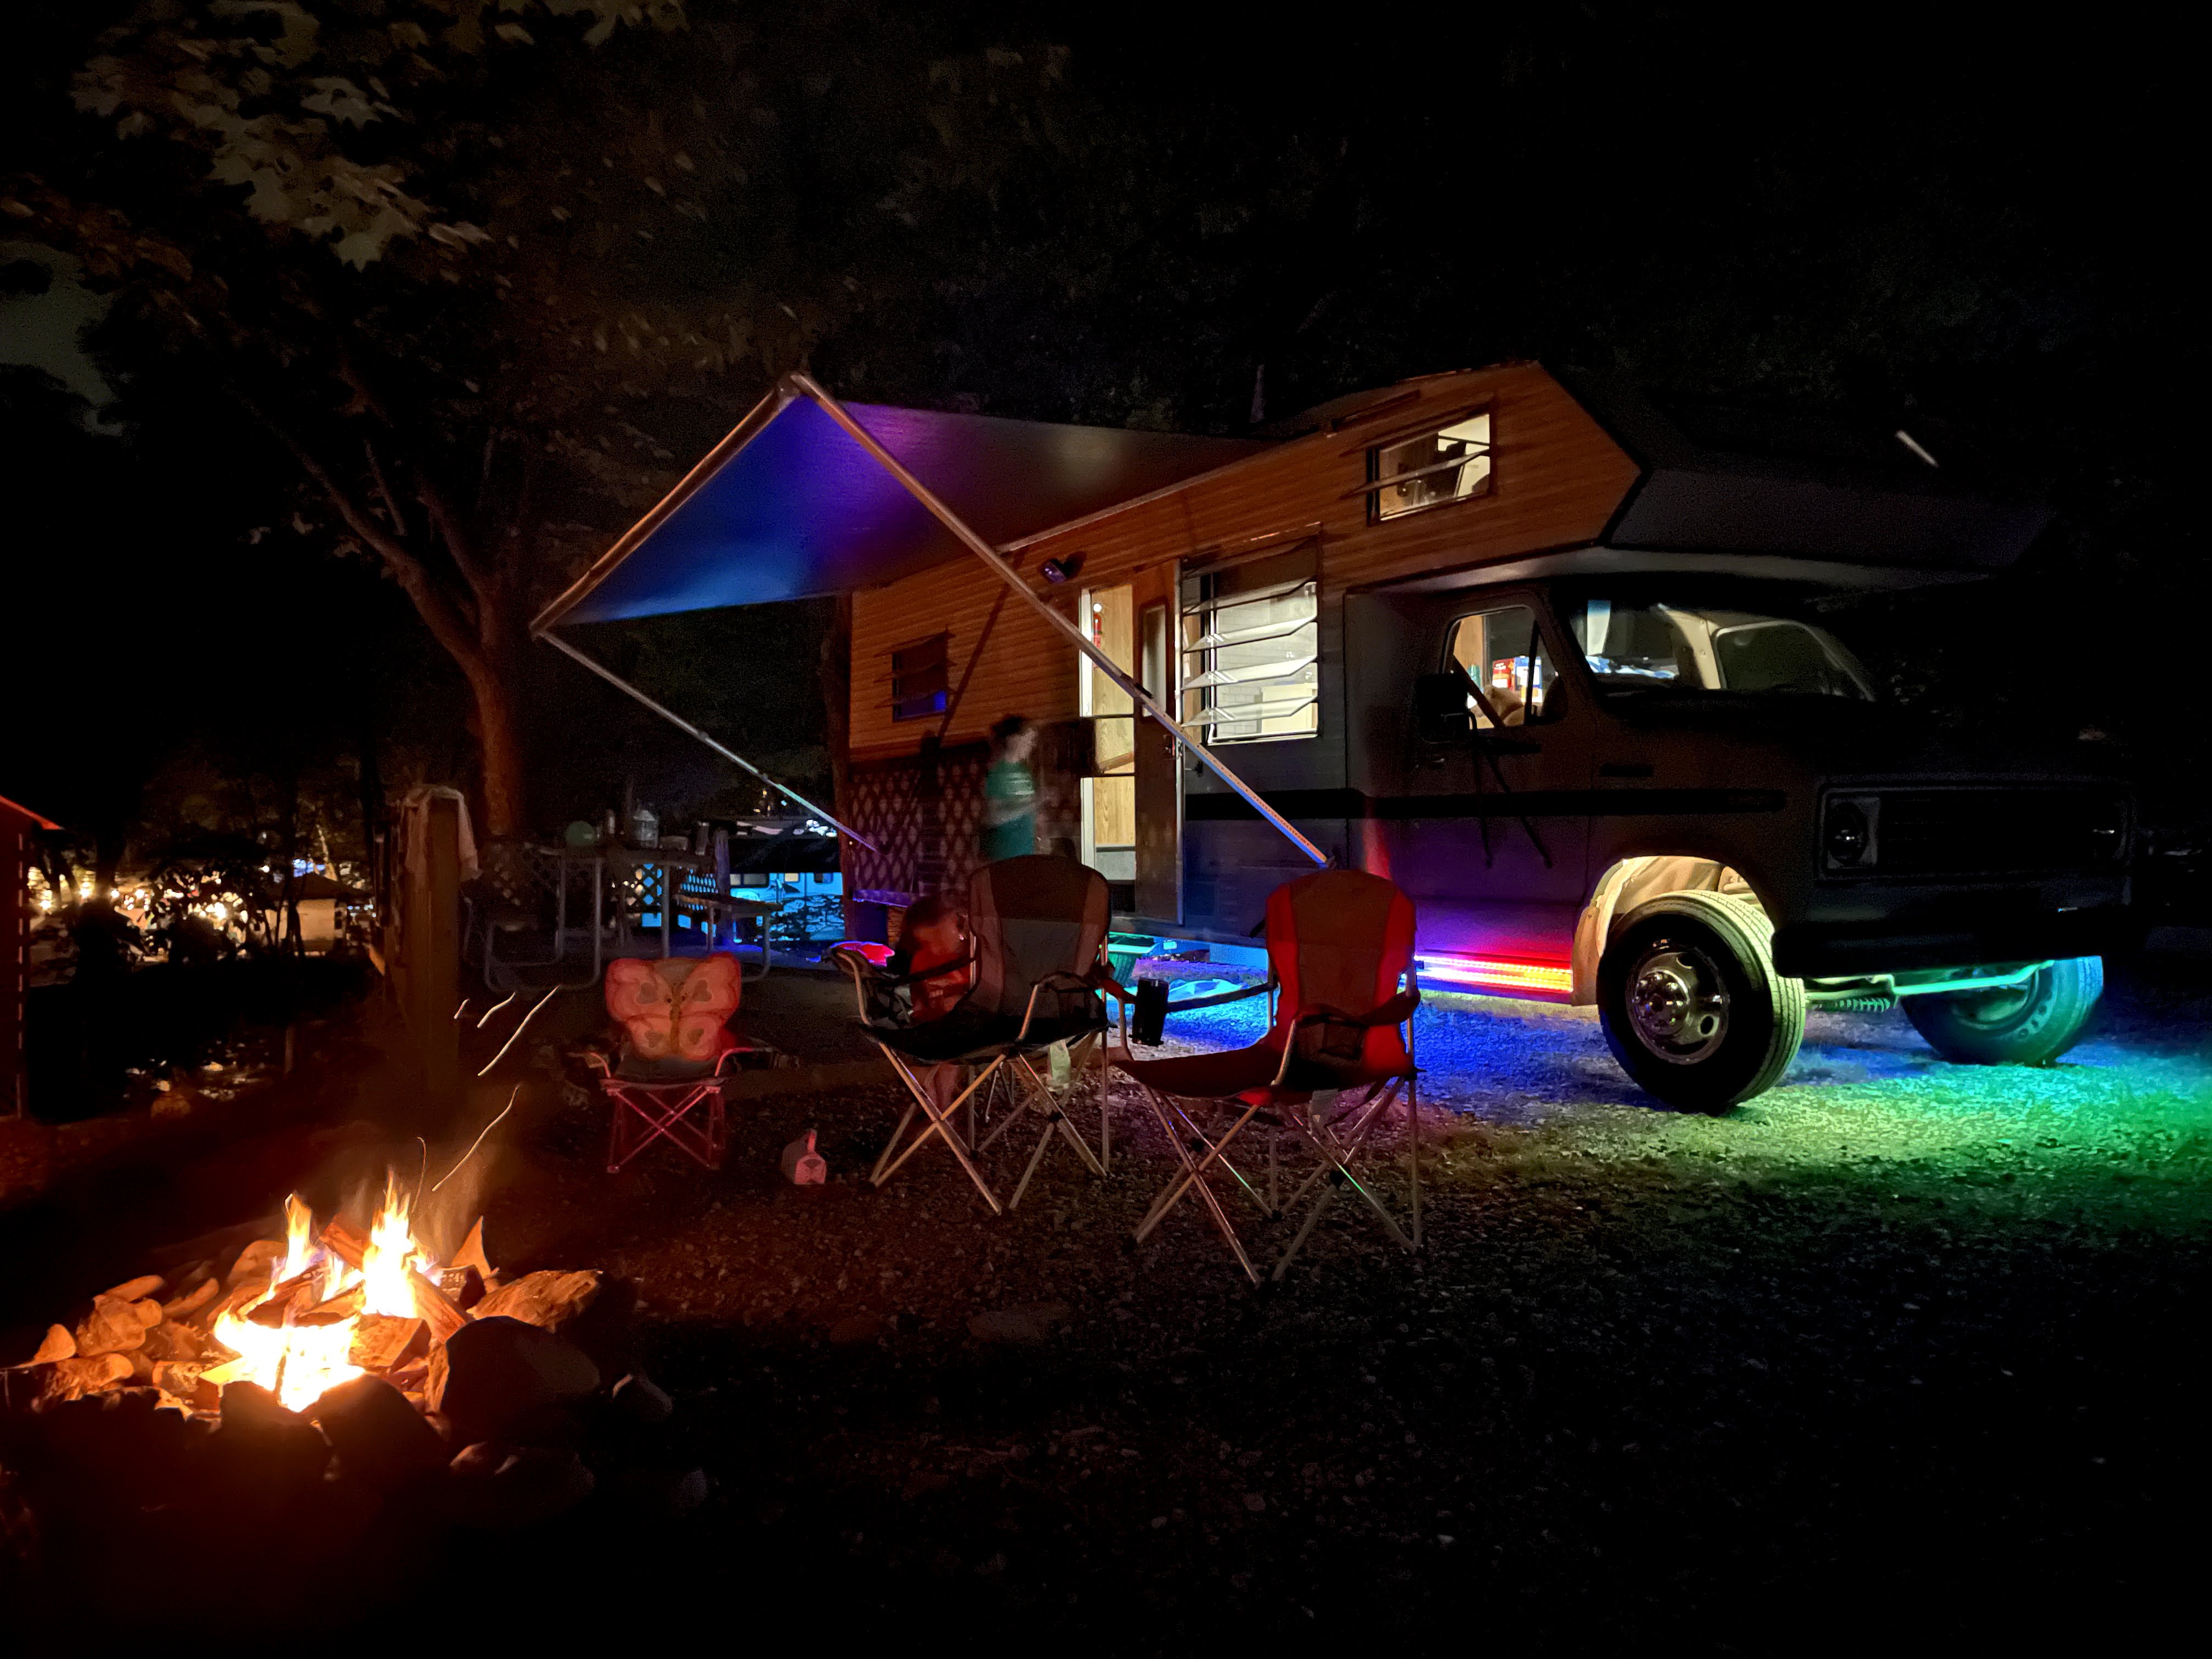 16-ft RGB Color Chasing, Animated LED Strip Lighting for RV, Boat, Motorcycle & More